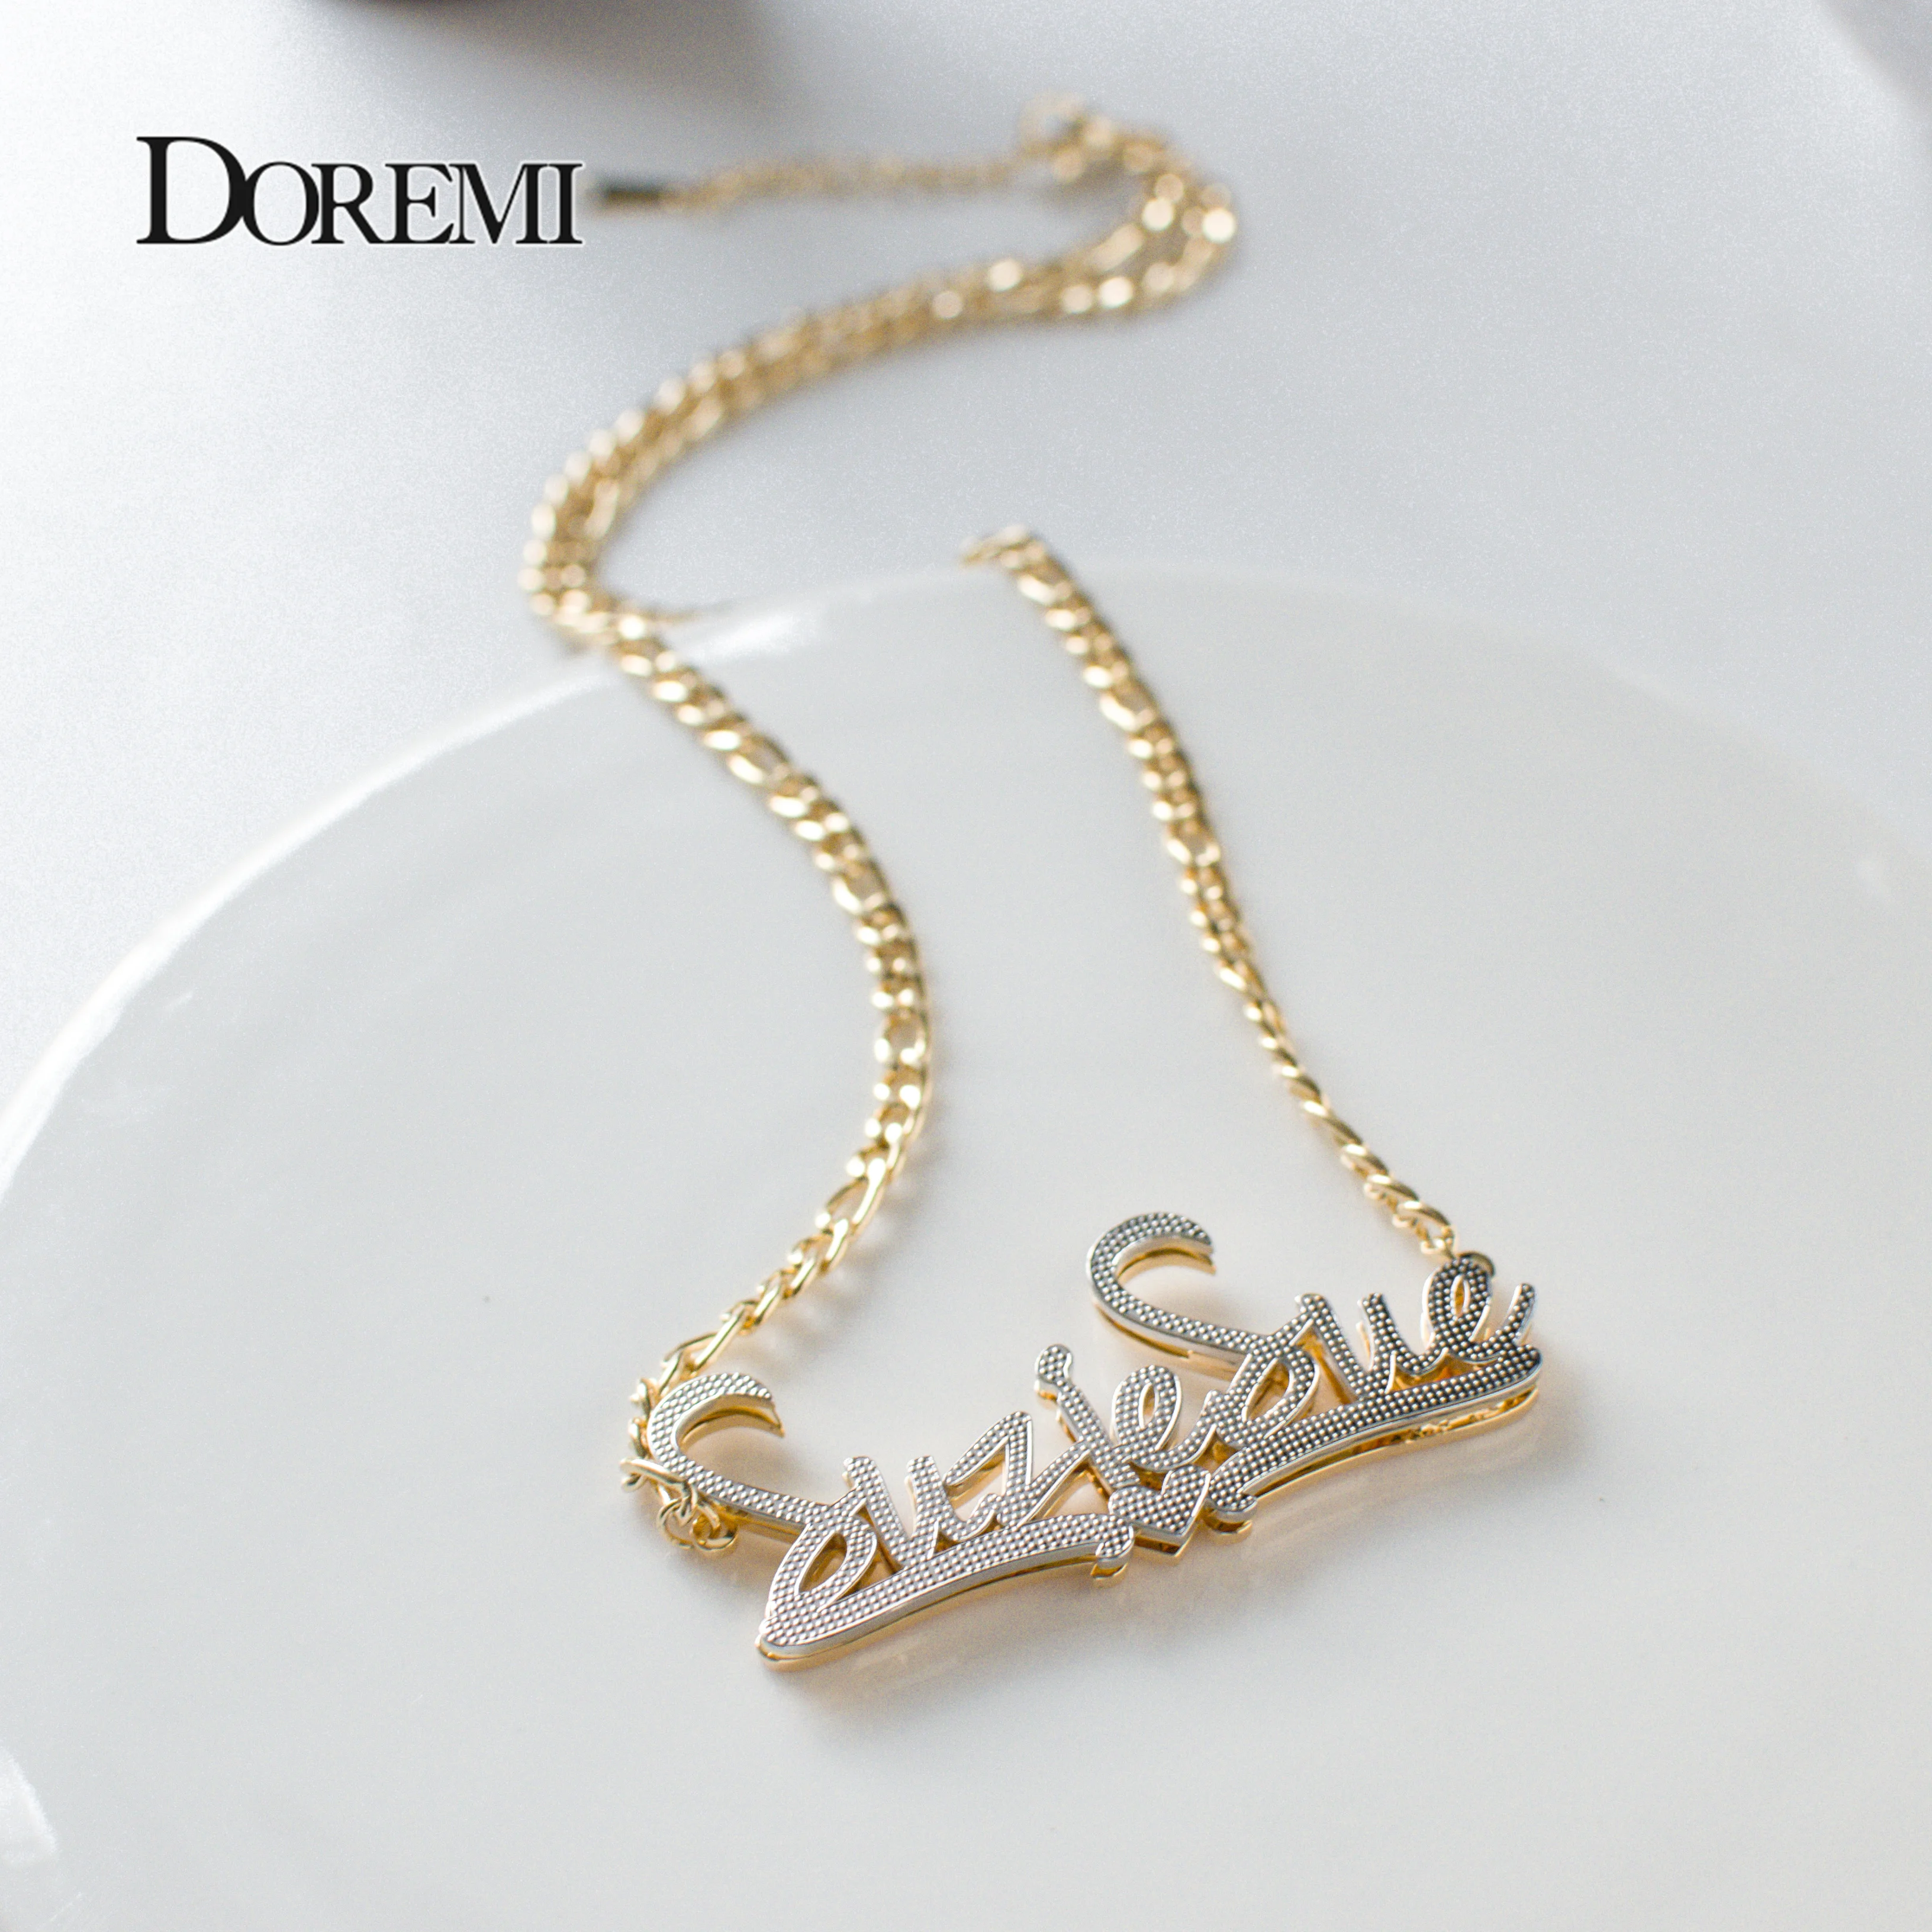 DOREMI 2 Toned 304 Stainless Name Necklace Heart Nameplate Personalized Pendant Double Layer Custom Jewelry Valentine's Day Gift doremi script tont crystal name necklaces letters pendant necklace for women custom chain jewelry personalized valentine s day